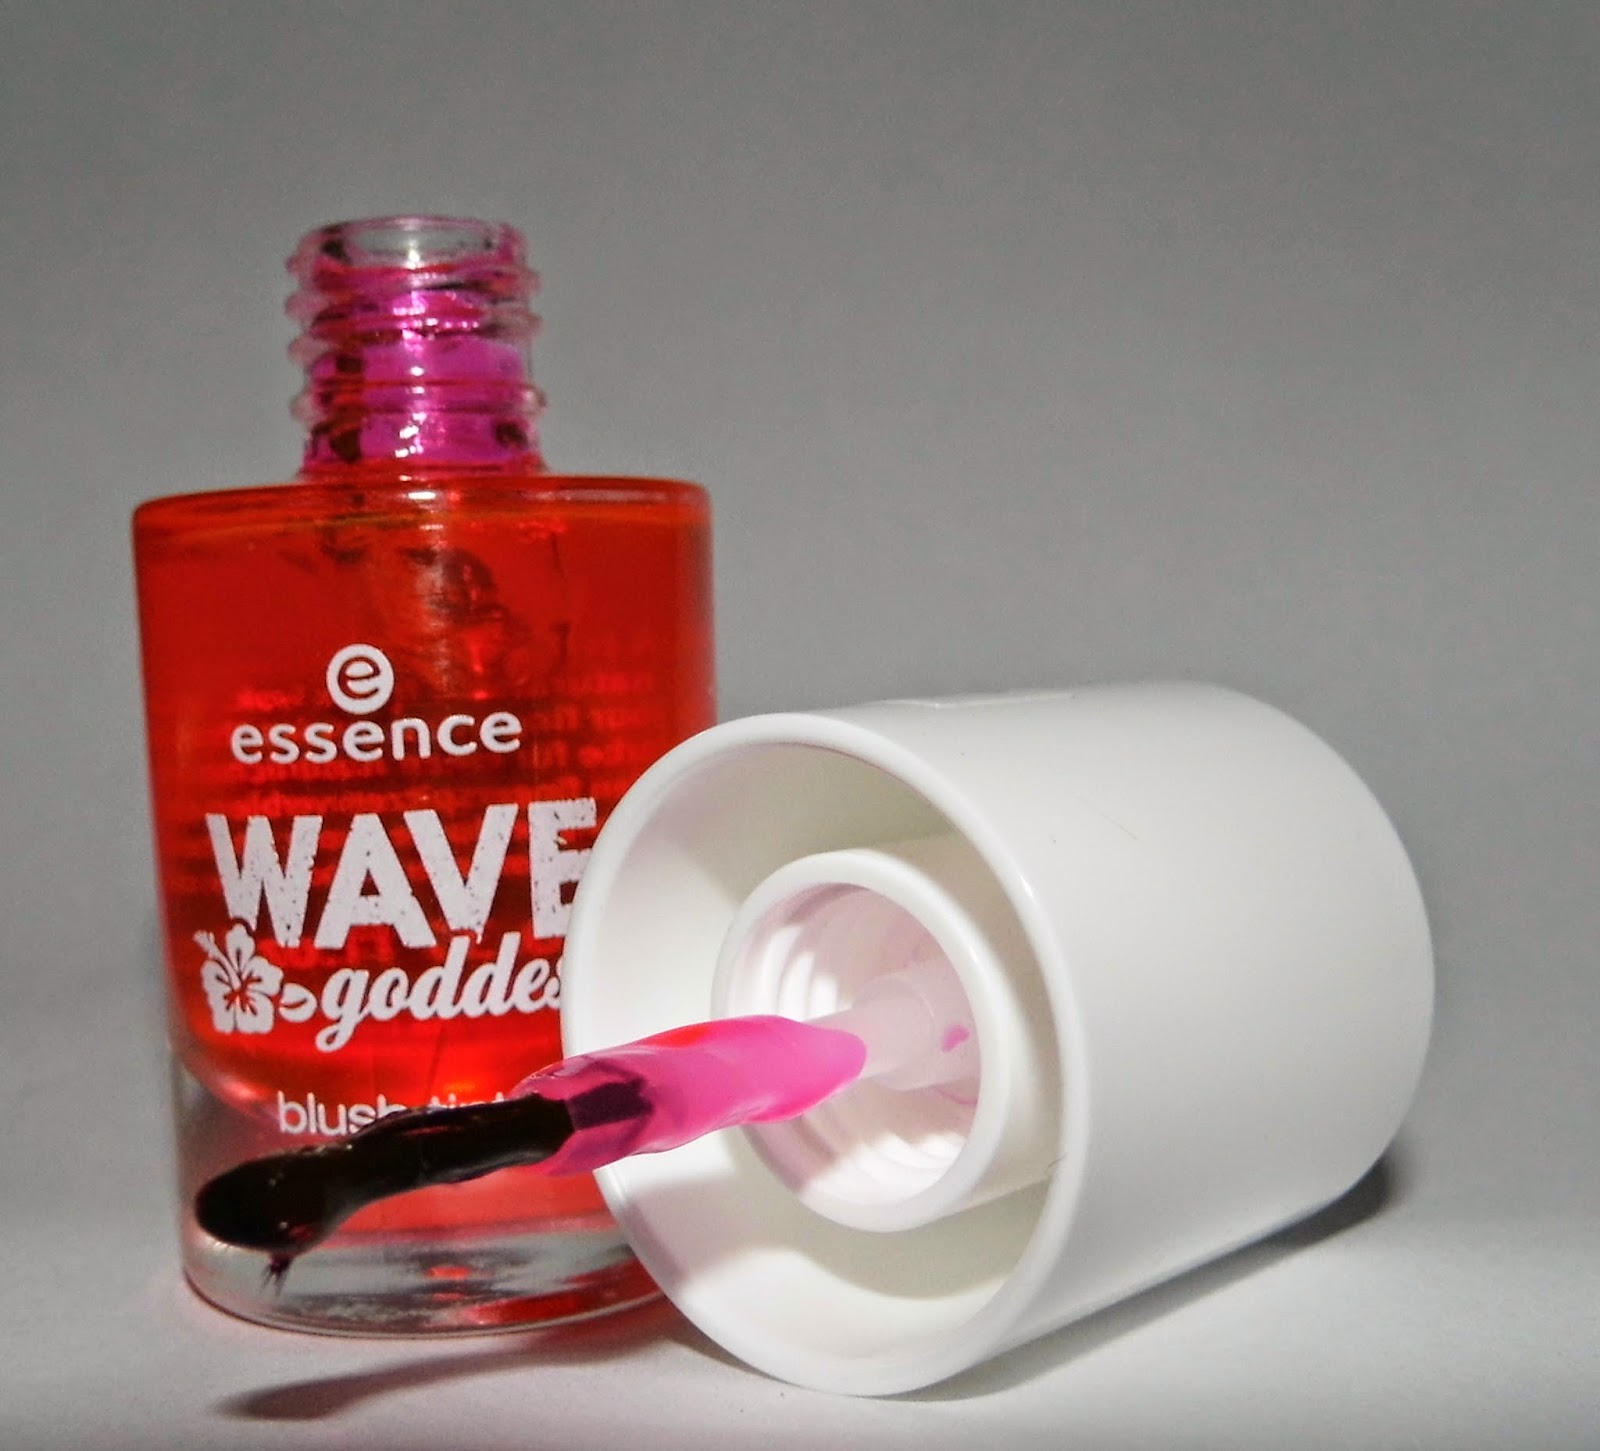 essence-wave-goddess-blush-tint-loose-your-heart-on-the-board